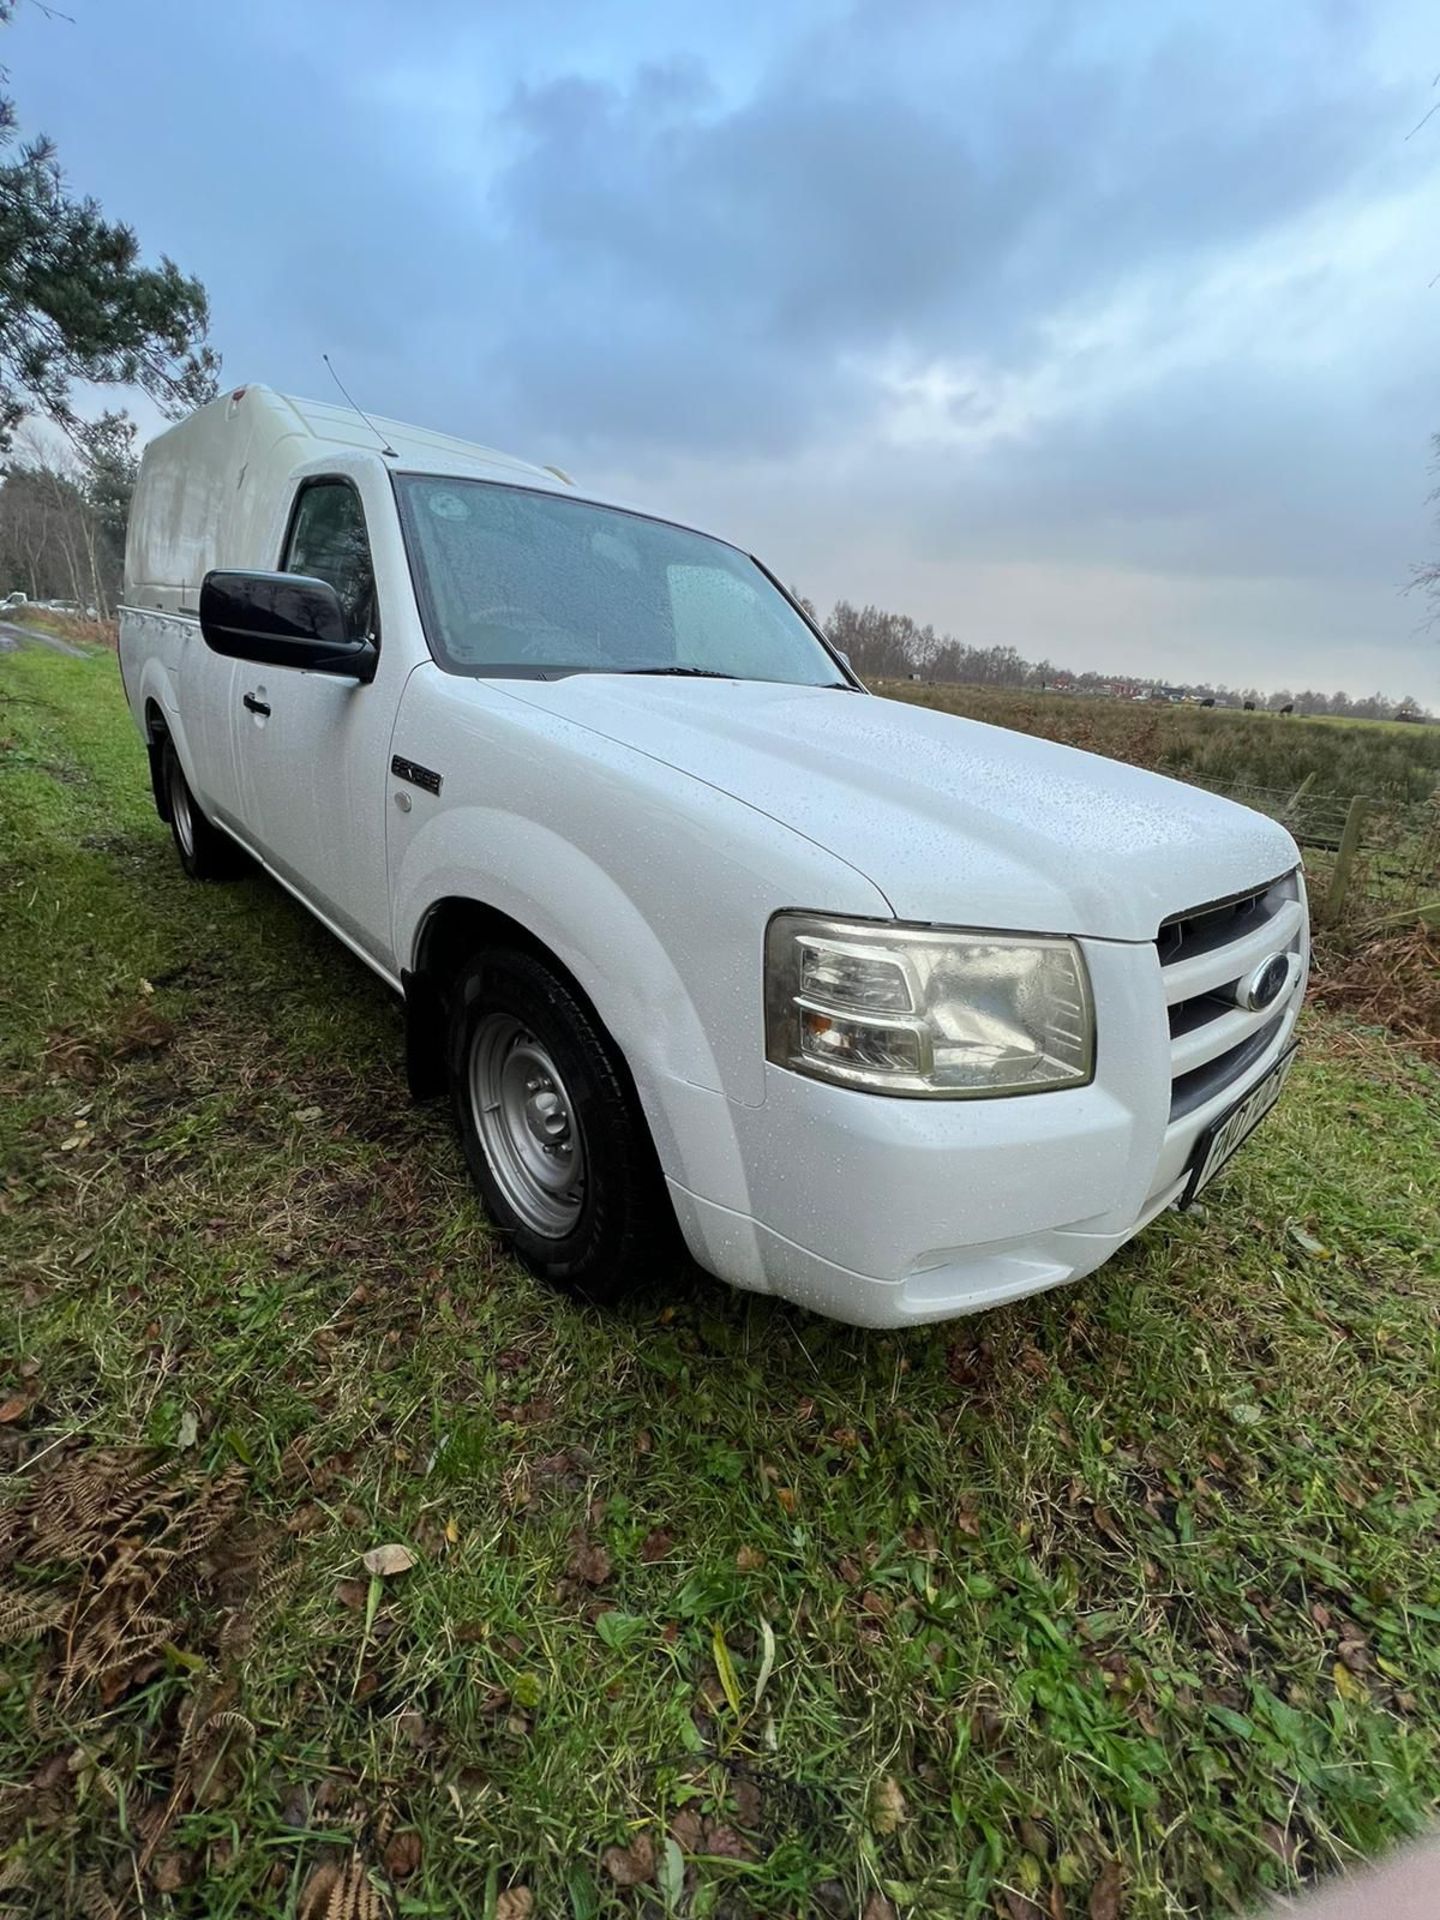 FORD RANGER SINGLE CAB PICKUP TRUCK 2WD EX NHS